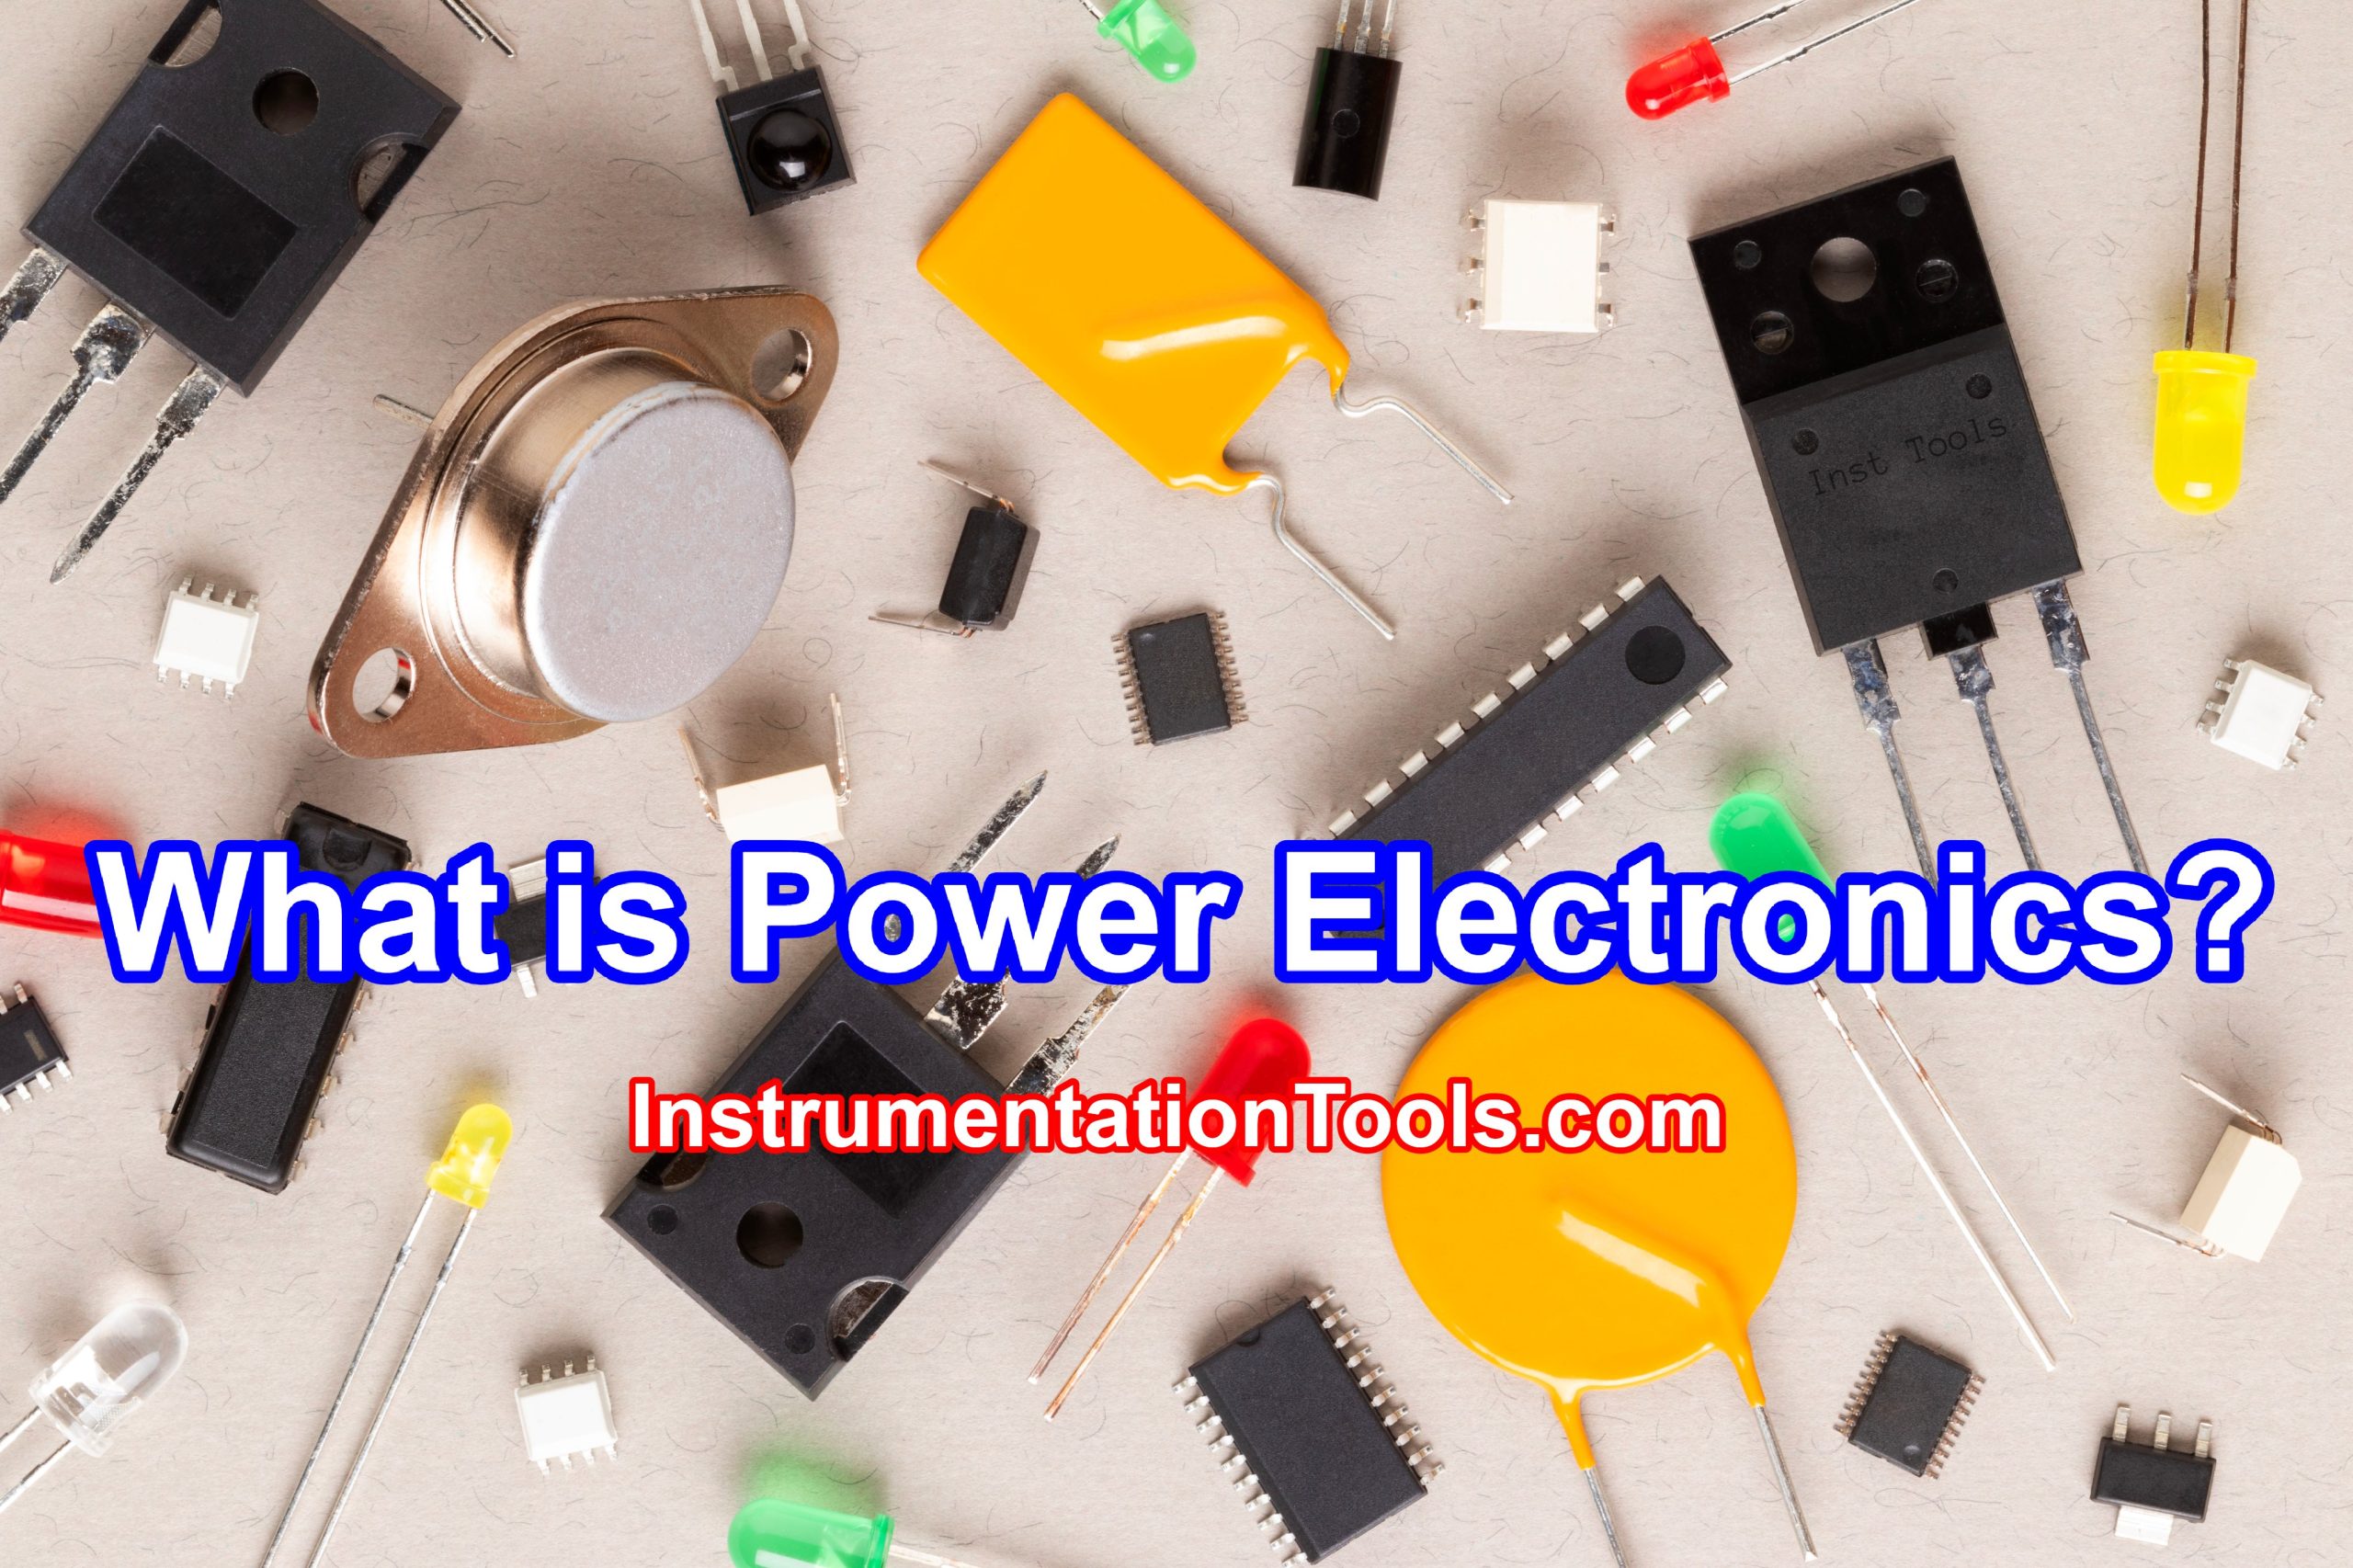 What is Power Electronics